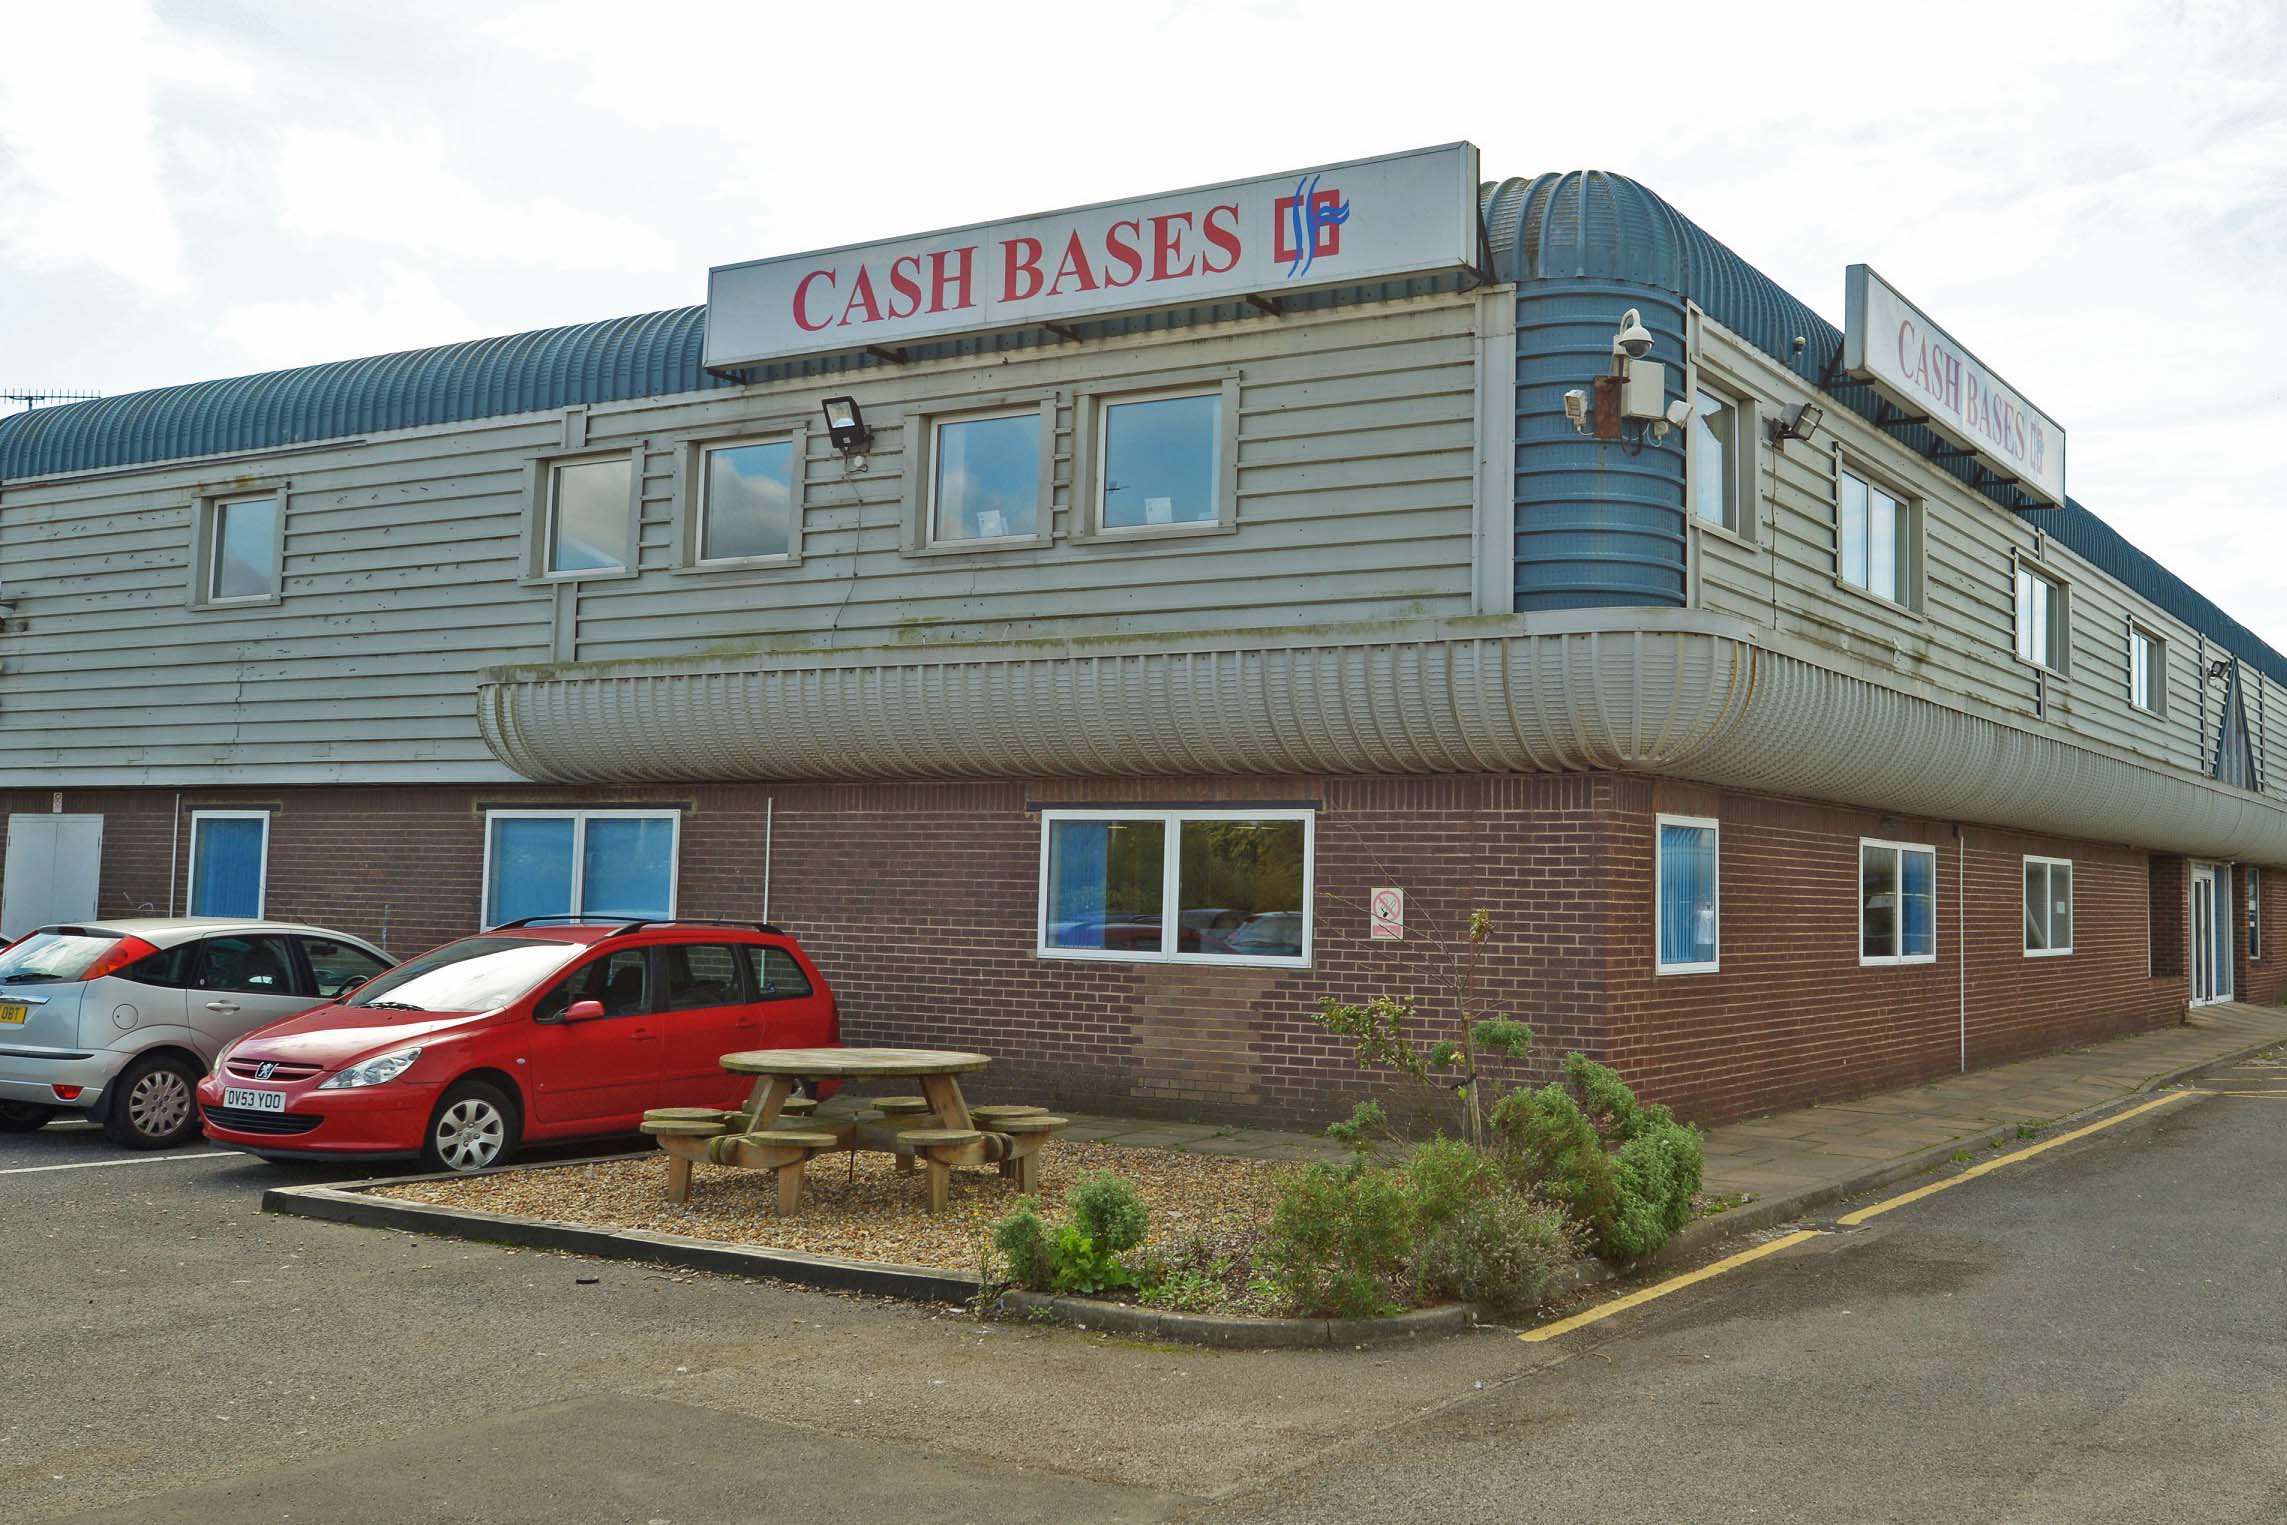 Cash Bases, headquartered in Newhaven, East Sussex, United Kingdom